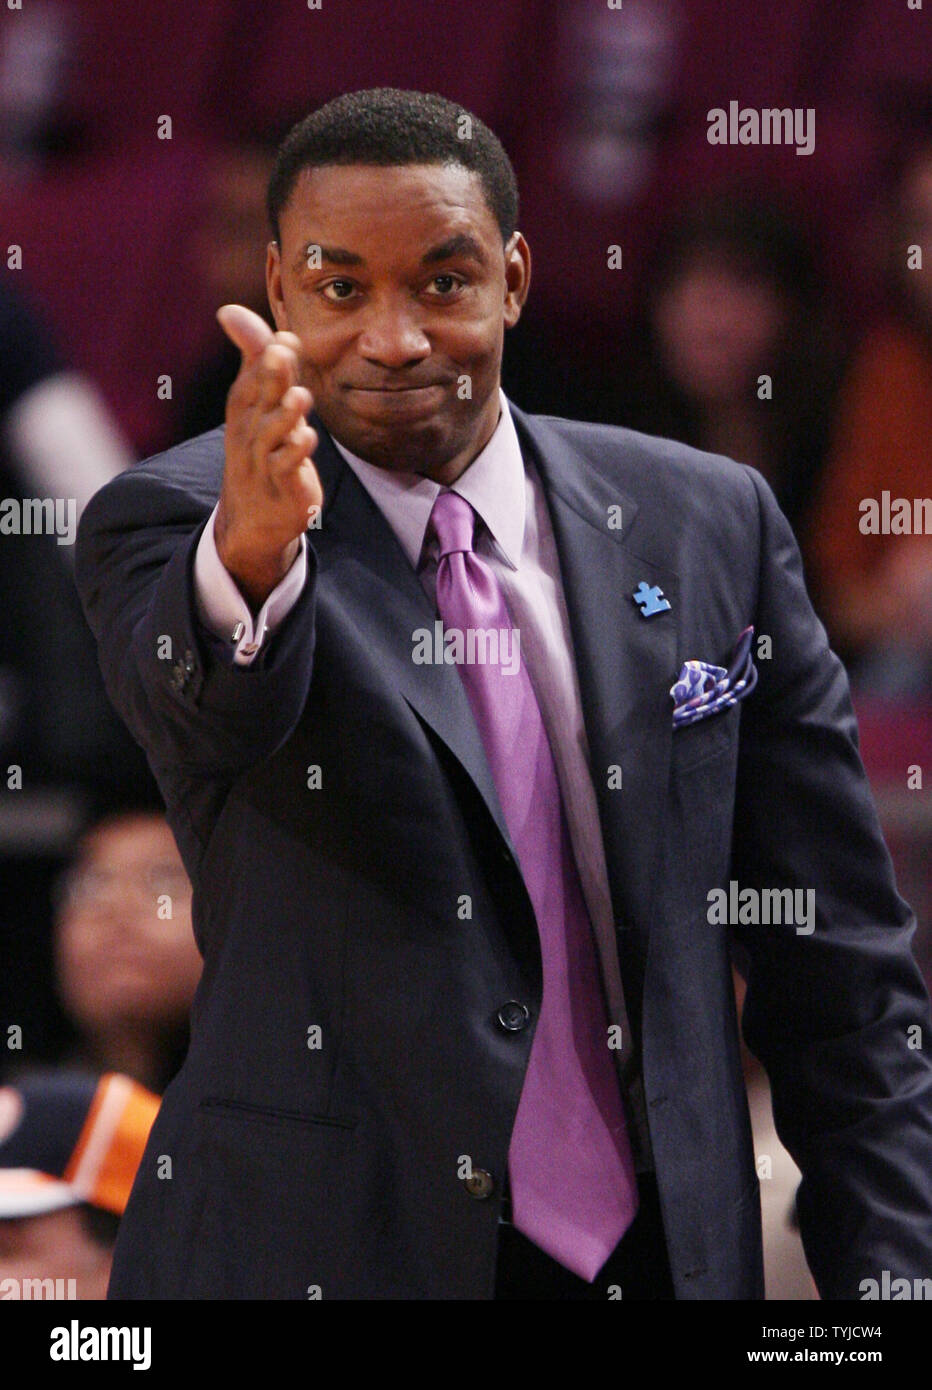 New York Knicks head coach Isiah Thomas sticks his hand out while coaching in the first quarter against the Detroit Pistons at Madison Square Garden in New York City on January 13, 2008.  (UPI Photo/John Angelillo)   . Stock Photo